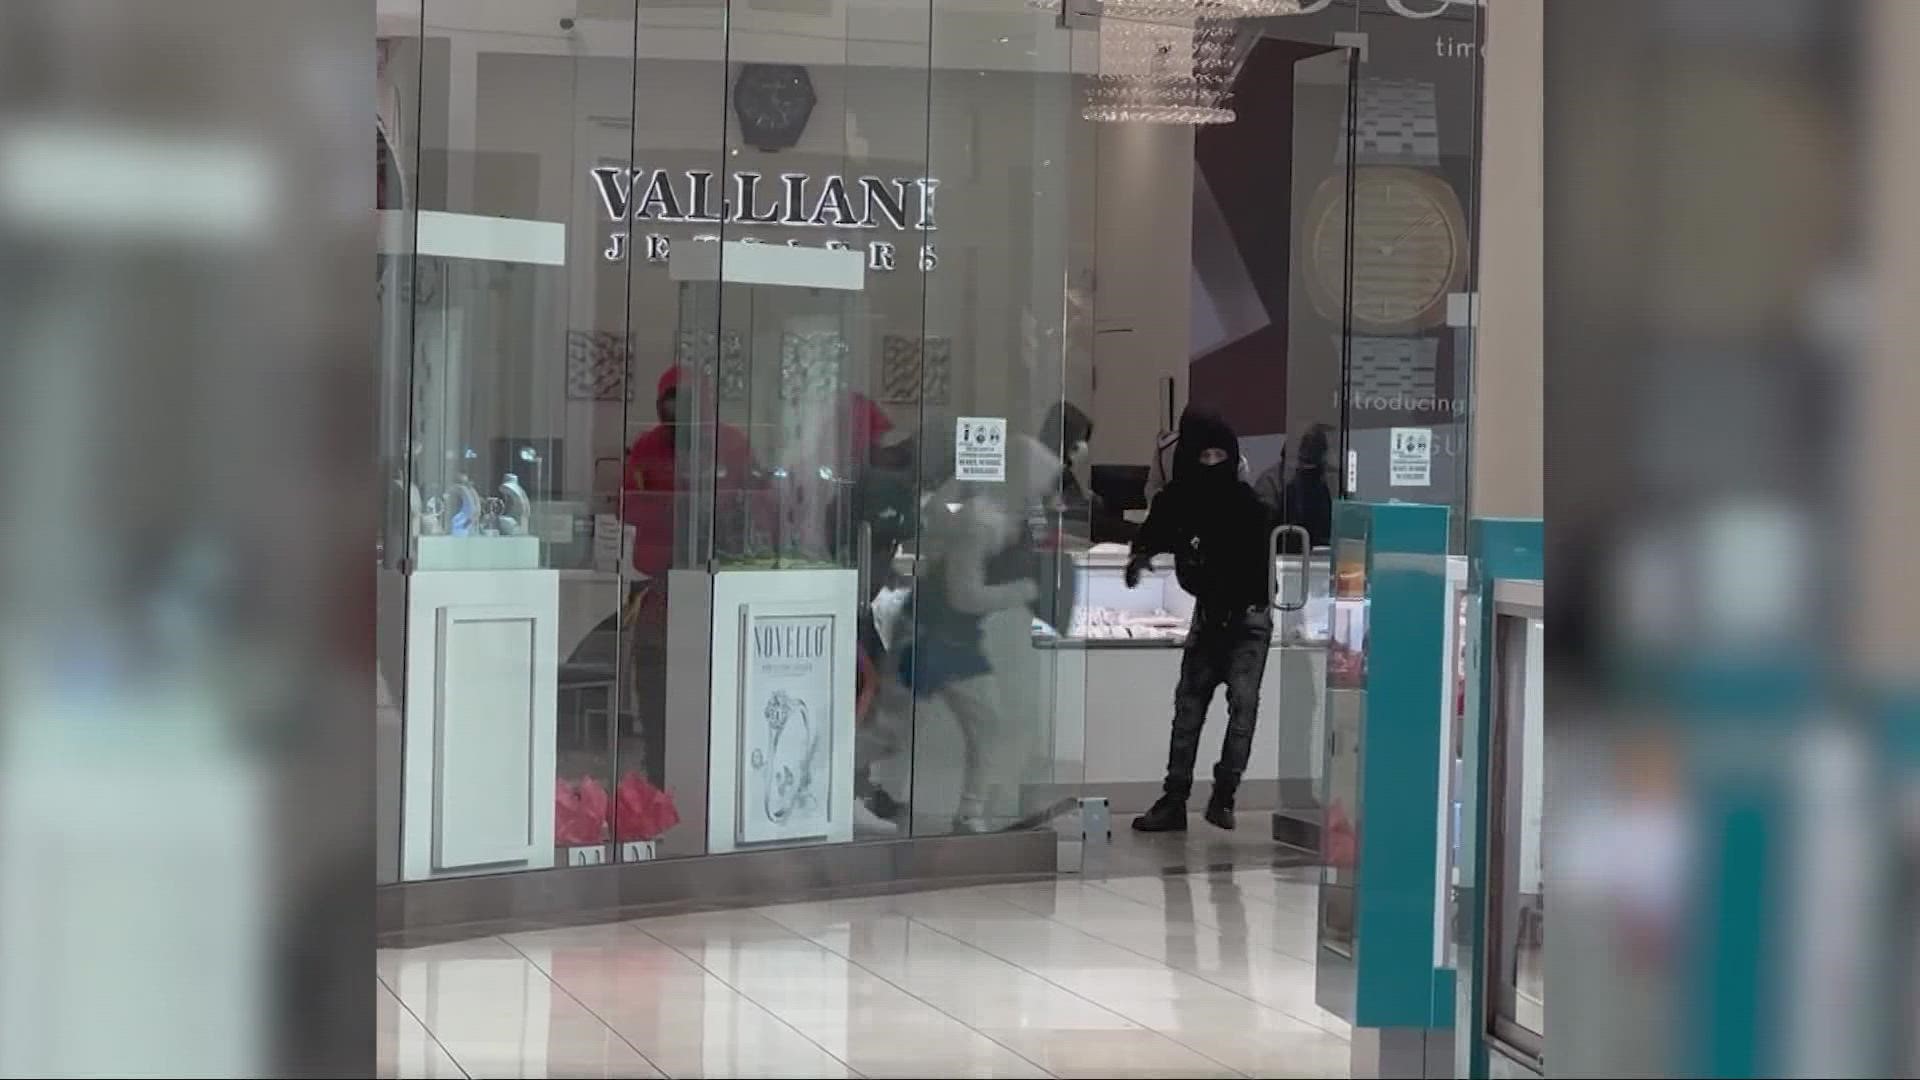 The mall is on high alert this year after previous incidents like the smash and grab at a jewelry store earlier this year.